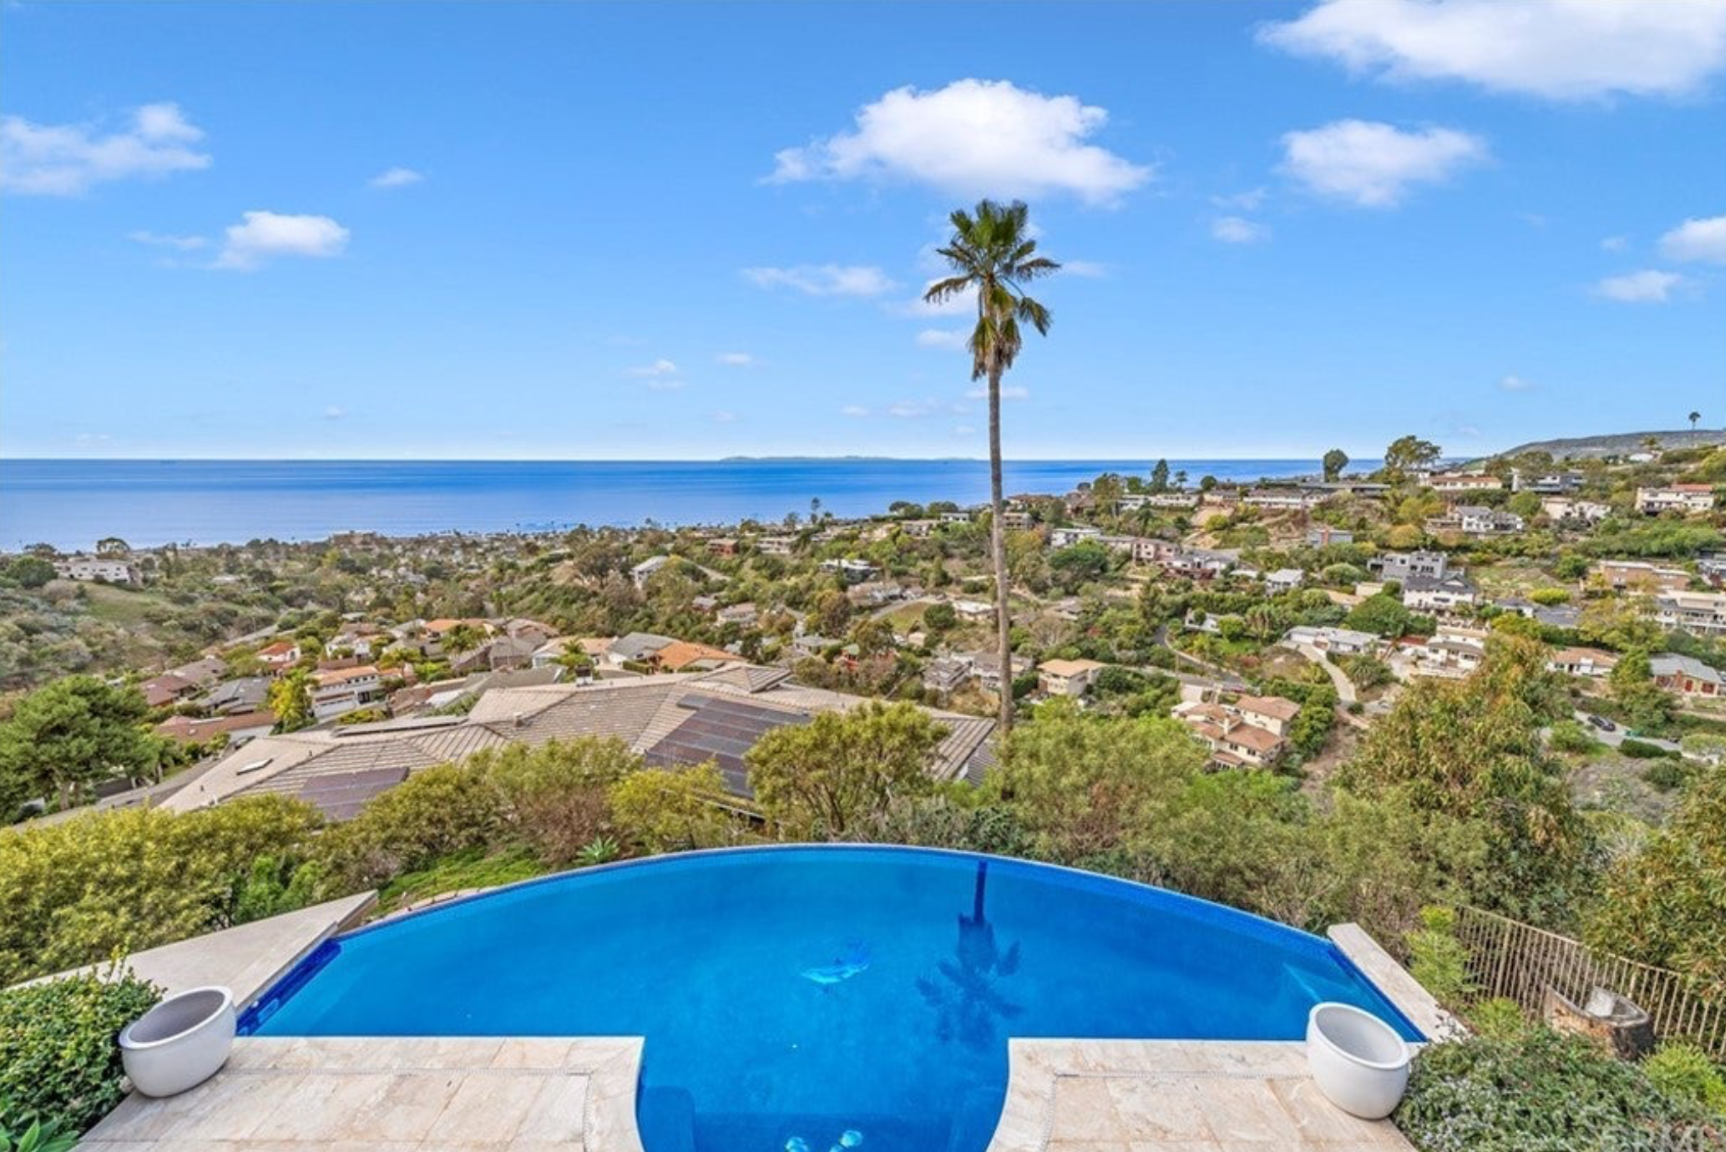 Laguna Beach Property For Sale And For Lease